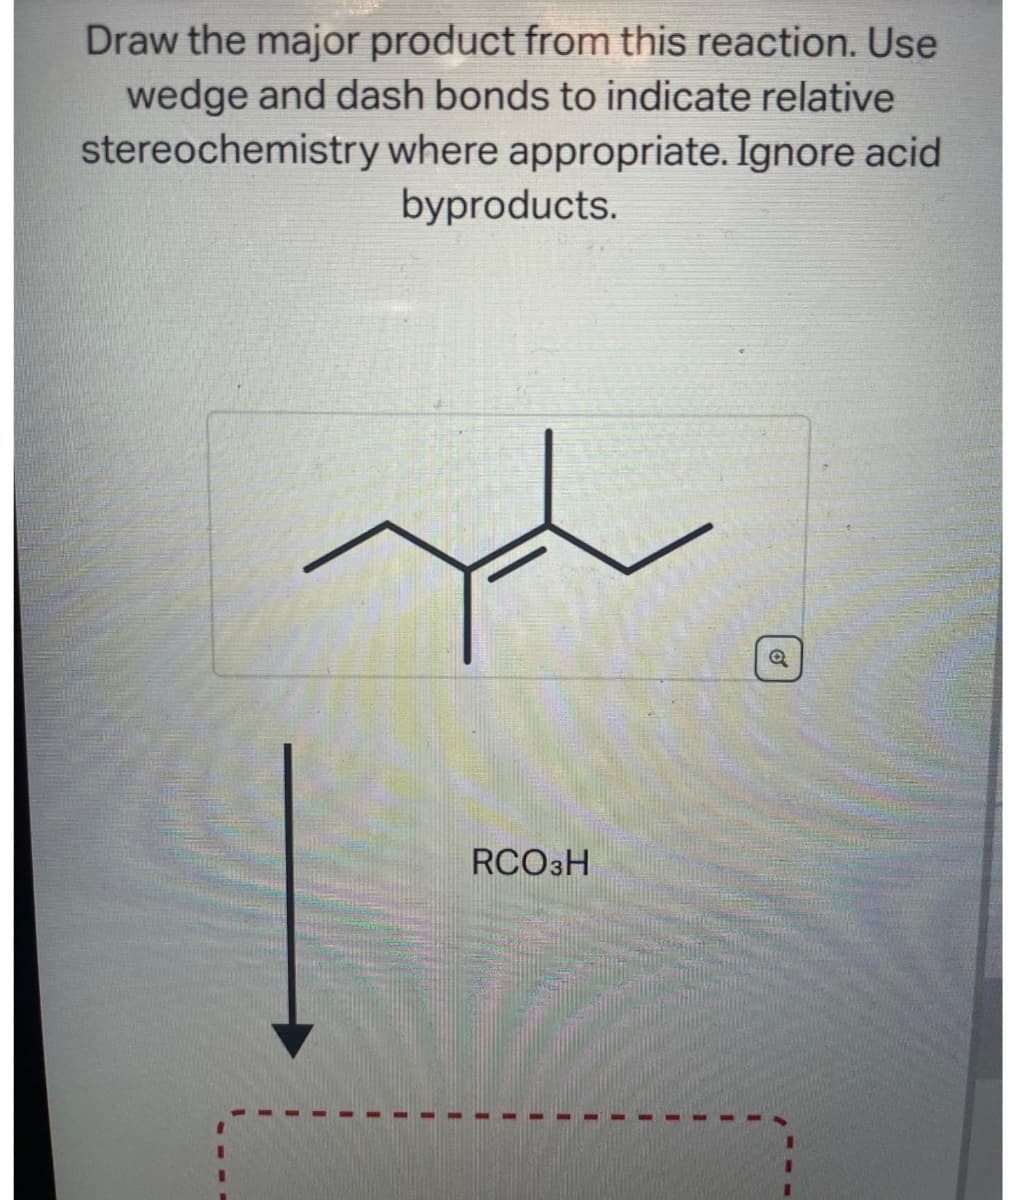 Draw the major product from this reaction. Use
wedge and dash bonds to indicate relative
stereochemistry where appropriate. Ignore acid
byproducts.
pt
1
RCO3H
I
I
I
1
Q